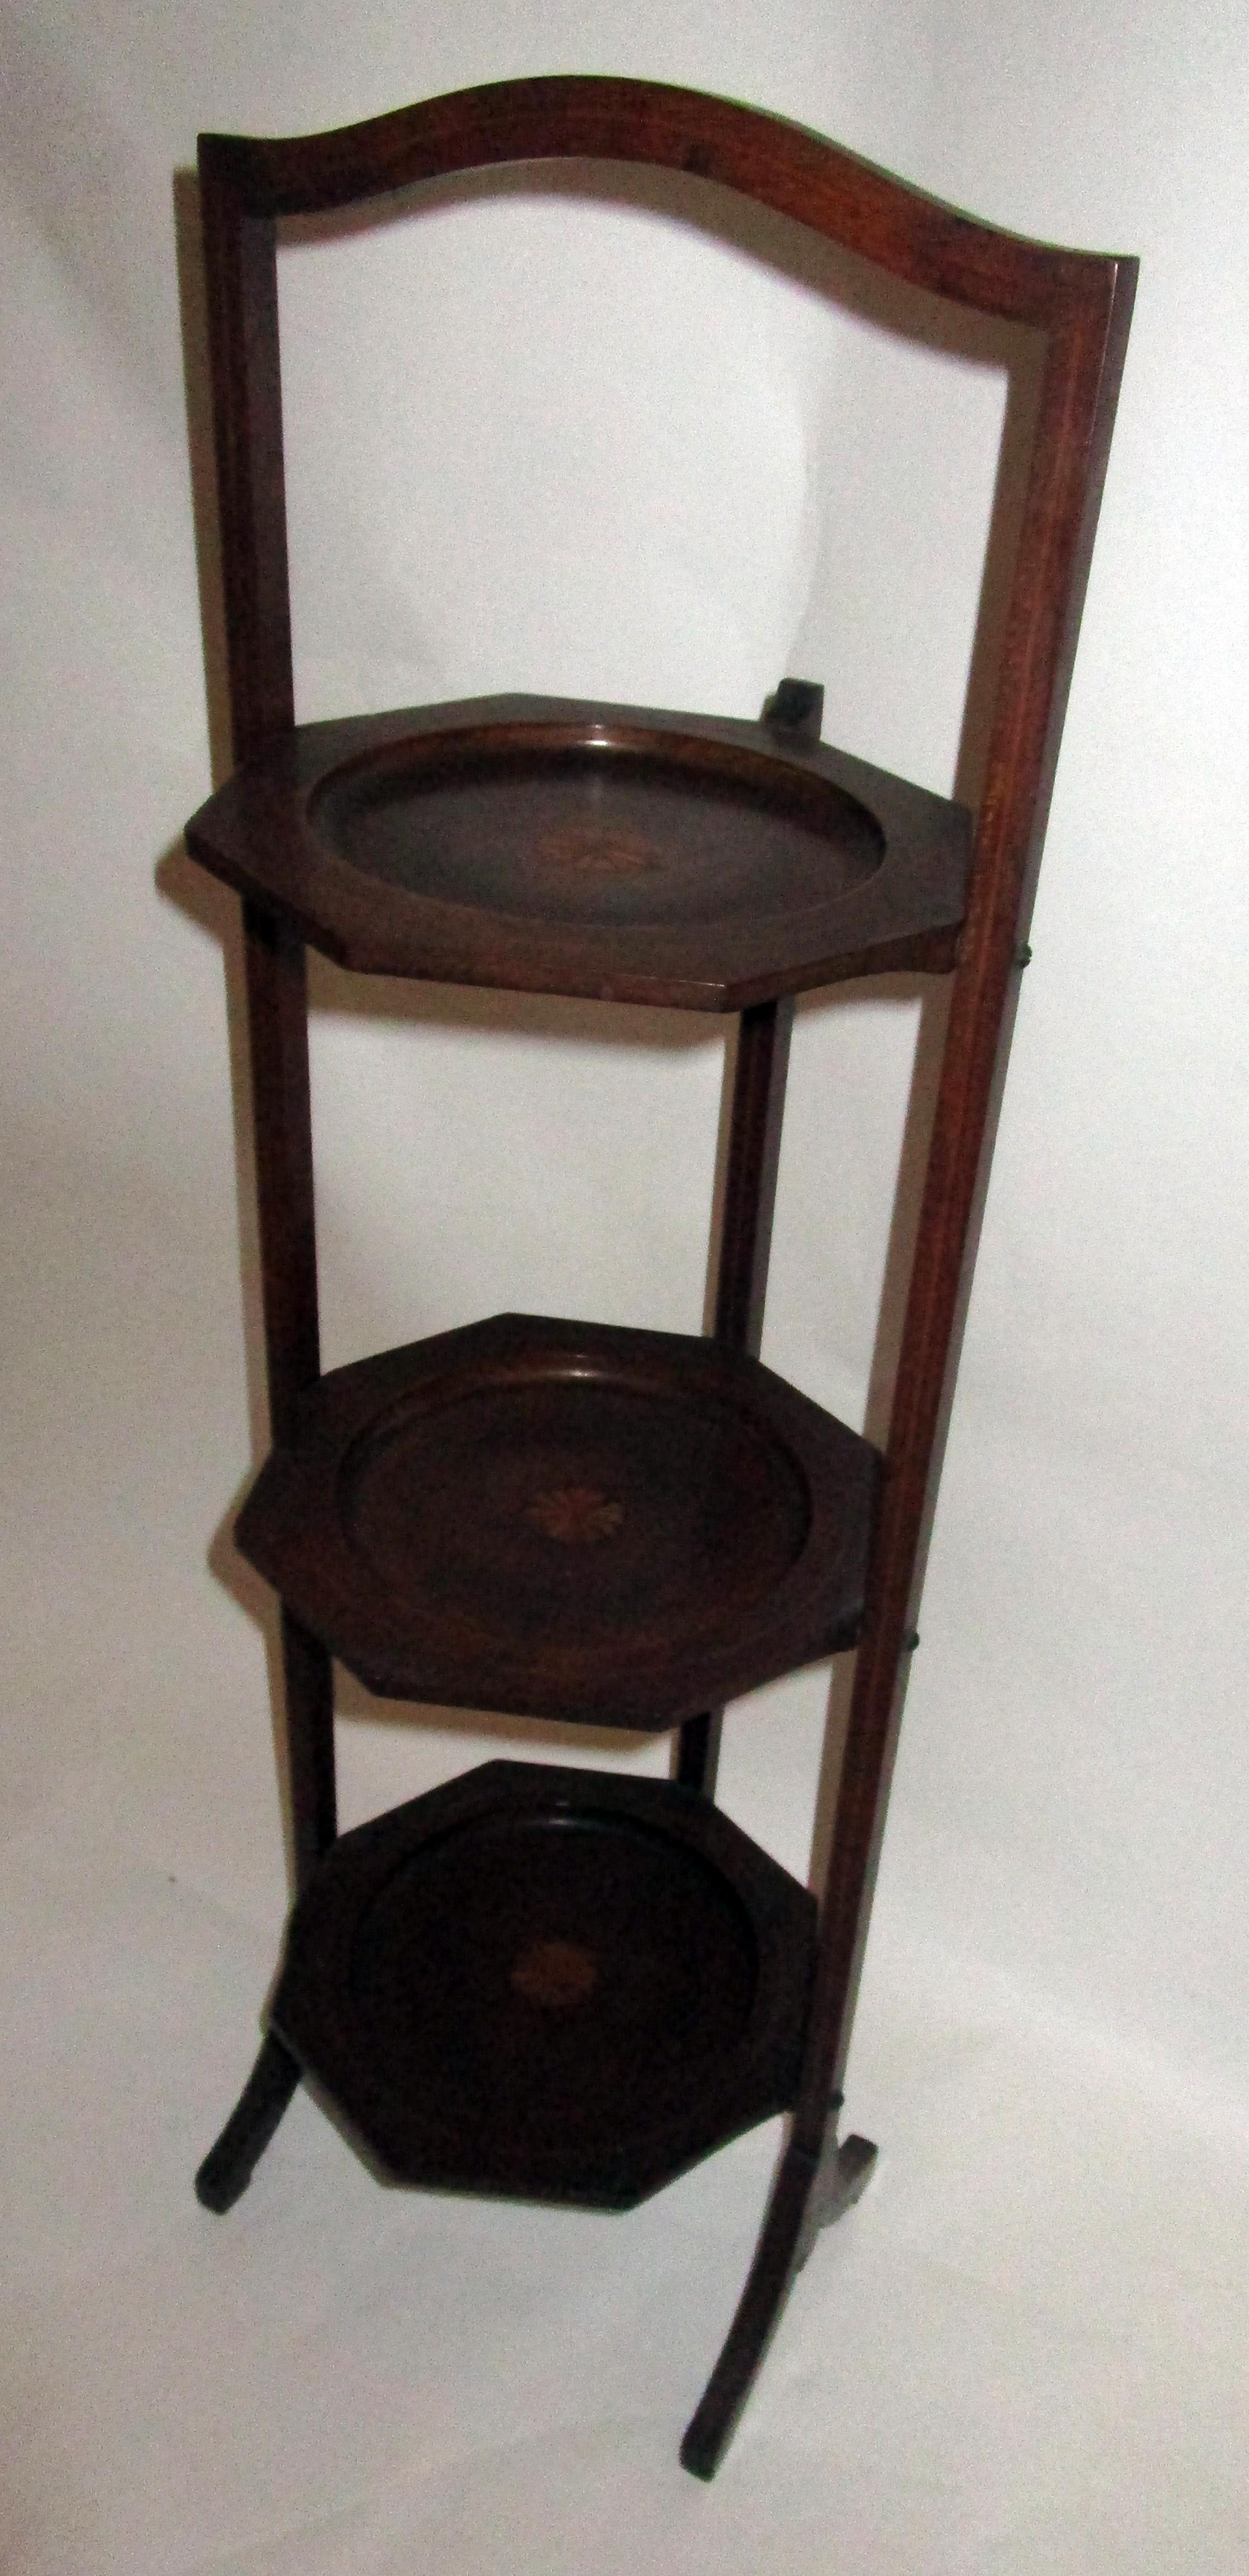 19th century Regency Mahogany Side Table or Muffin Stand 3